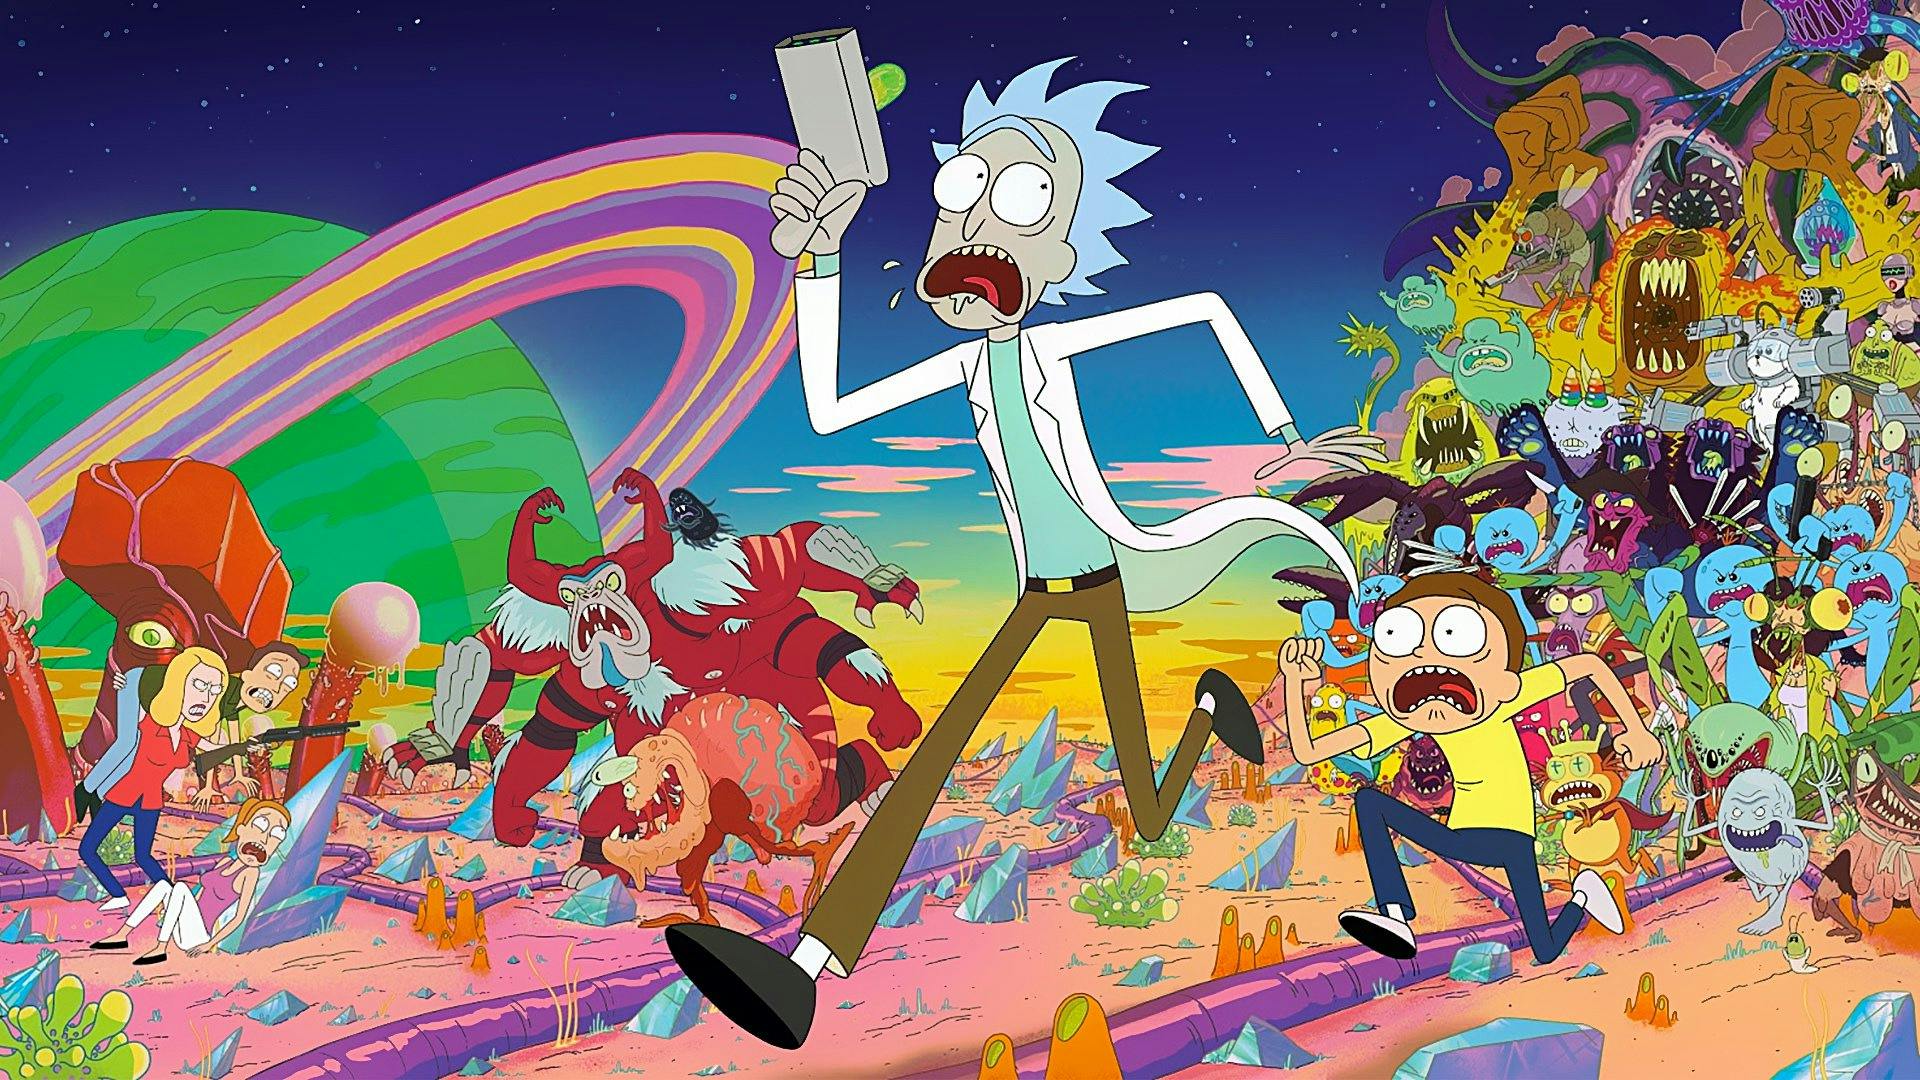 Riggity Riggity Wrecked  Rick and morty comic Rick and morty poster Rick  and morty characters